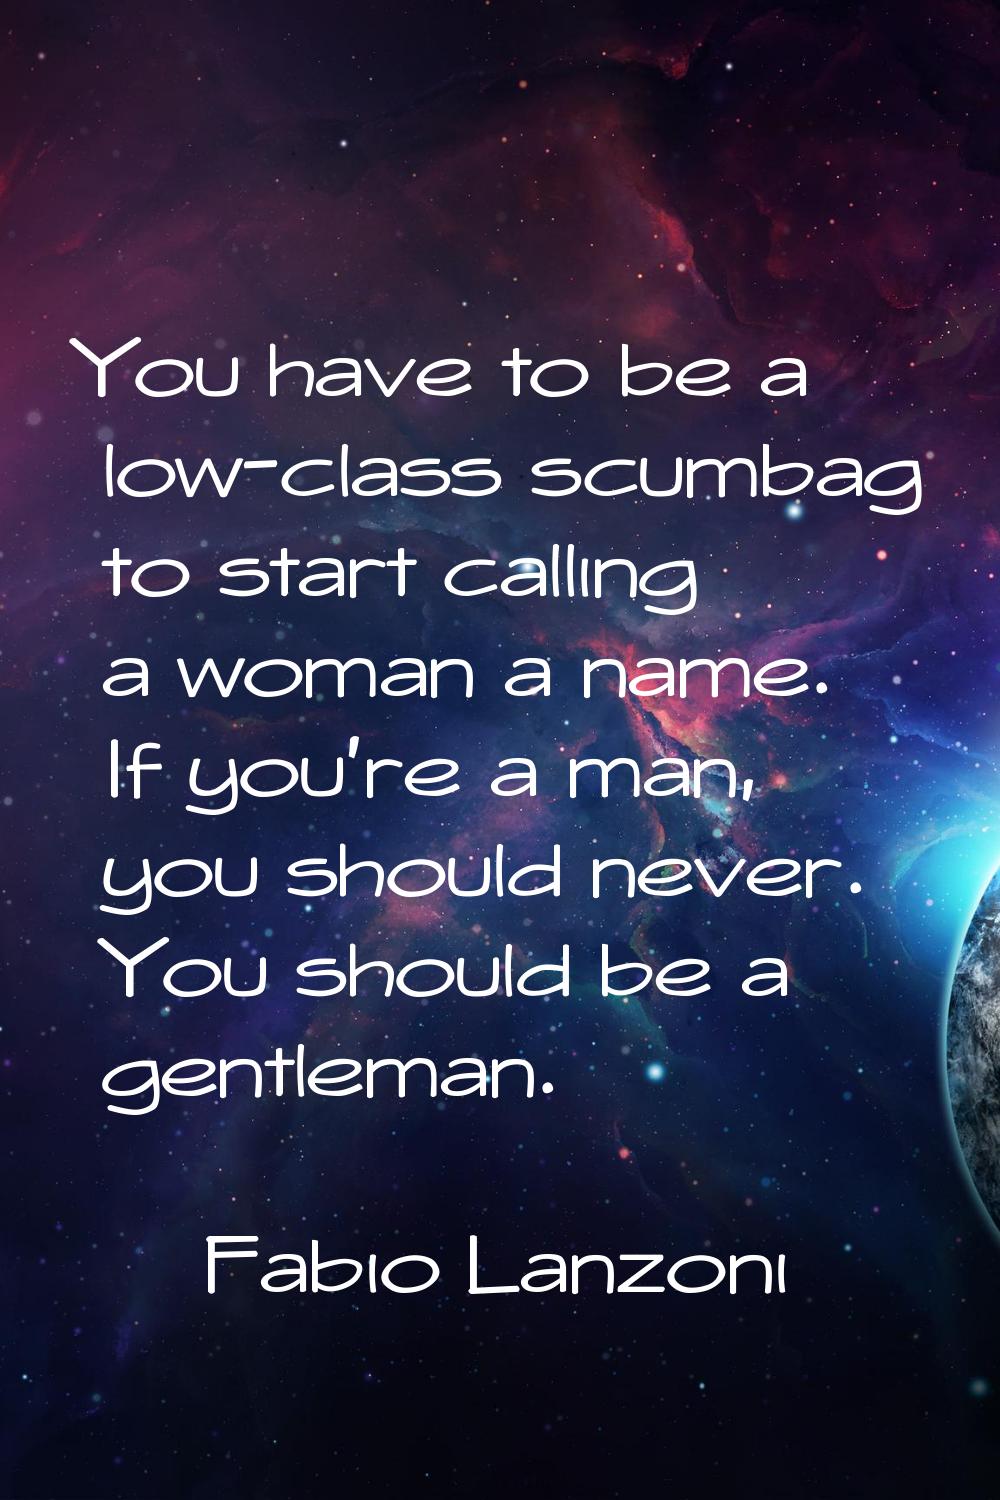 You have to be a low-class scumbag to start calling a woman a name. If you're a man, you should nev